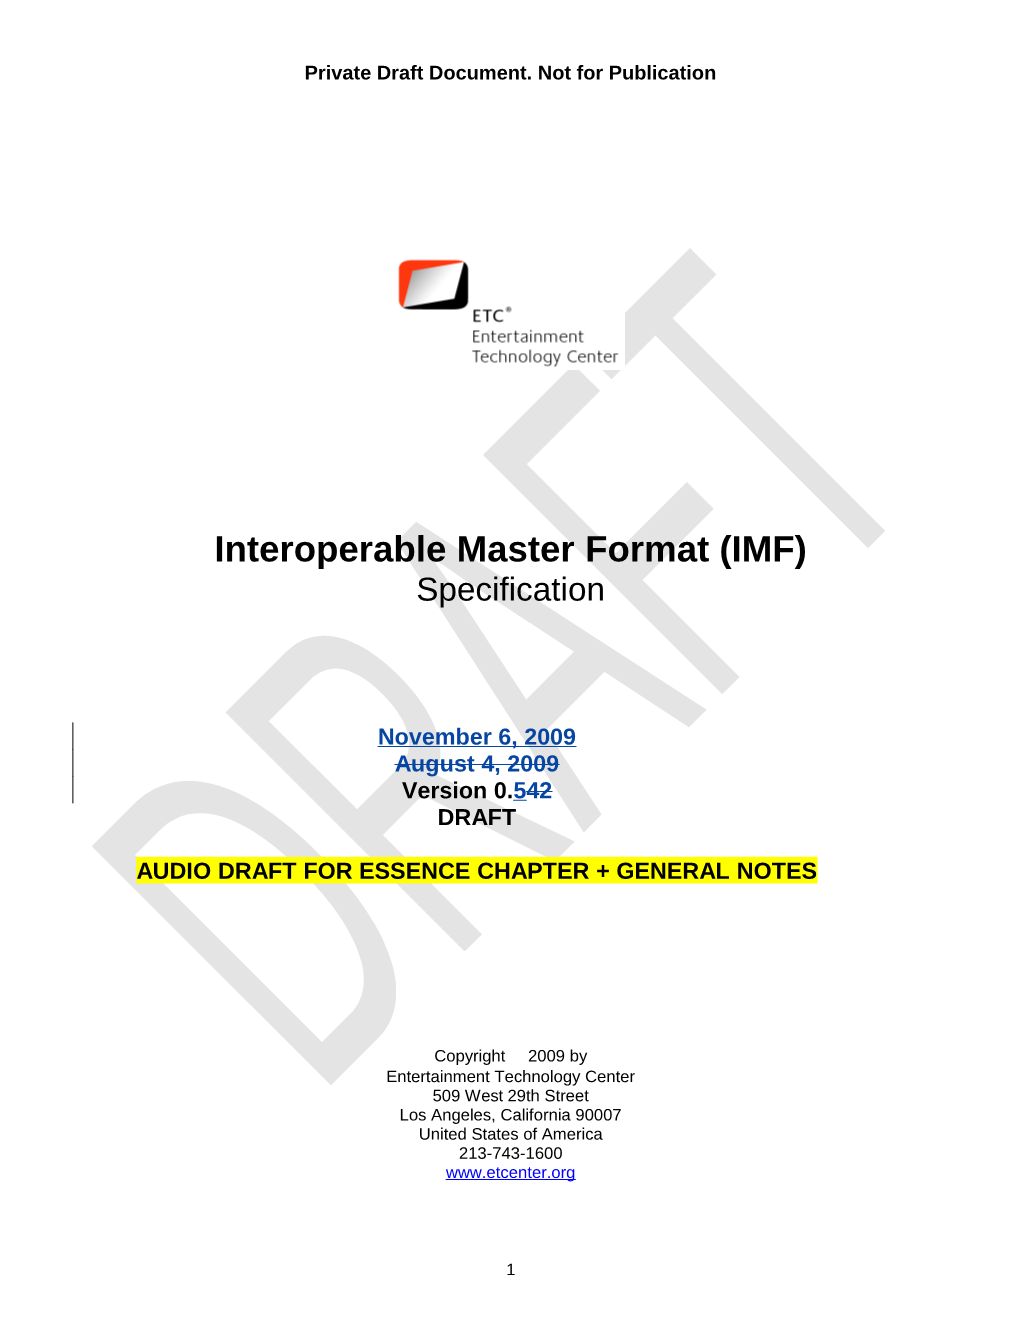 Interoperable Master Format (IMF) Specification